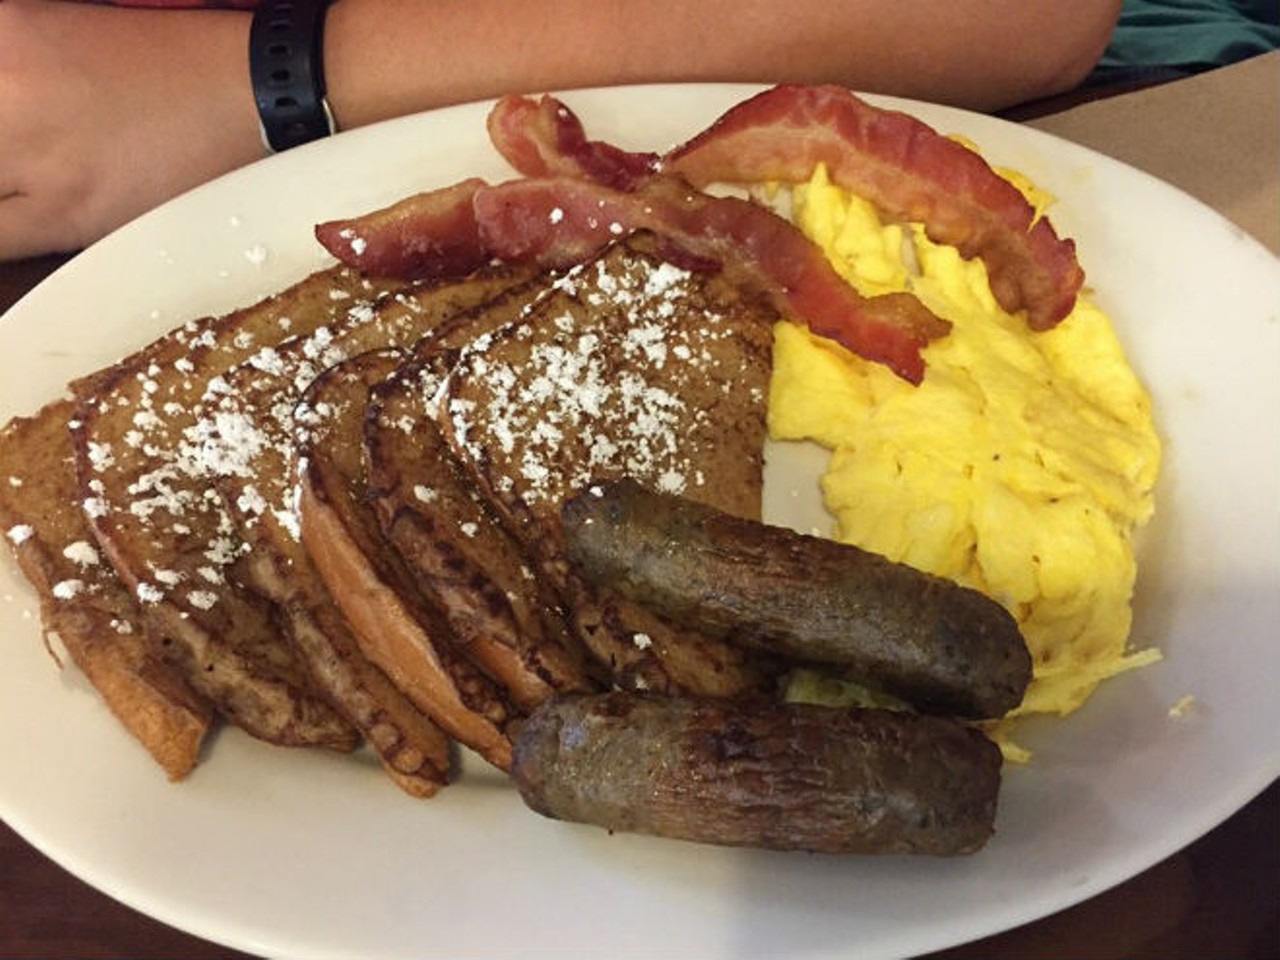 Daybreak Diner
Breakfast served Monday to Friday, 6 a.m. - 8 p.m. and Saturday and Sunday, 7 a.m. - 3 p.m.
3335 Curry Ford Road
(407) 898-8338
daybreakdiner.org
2x4 with French Toast, $7.99 
Photo via Yelp